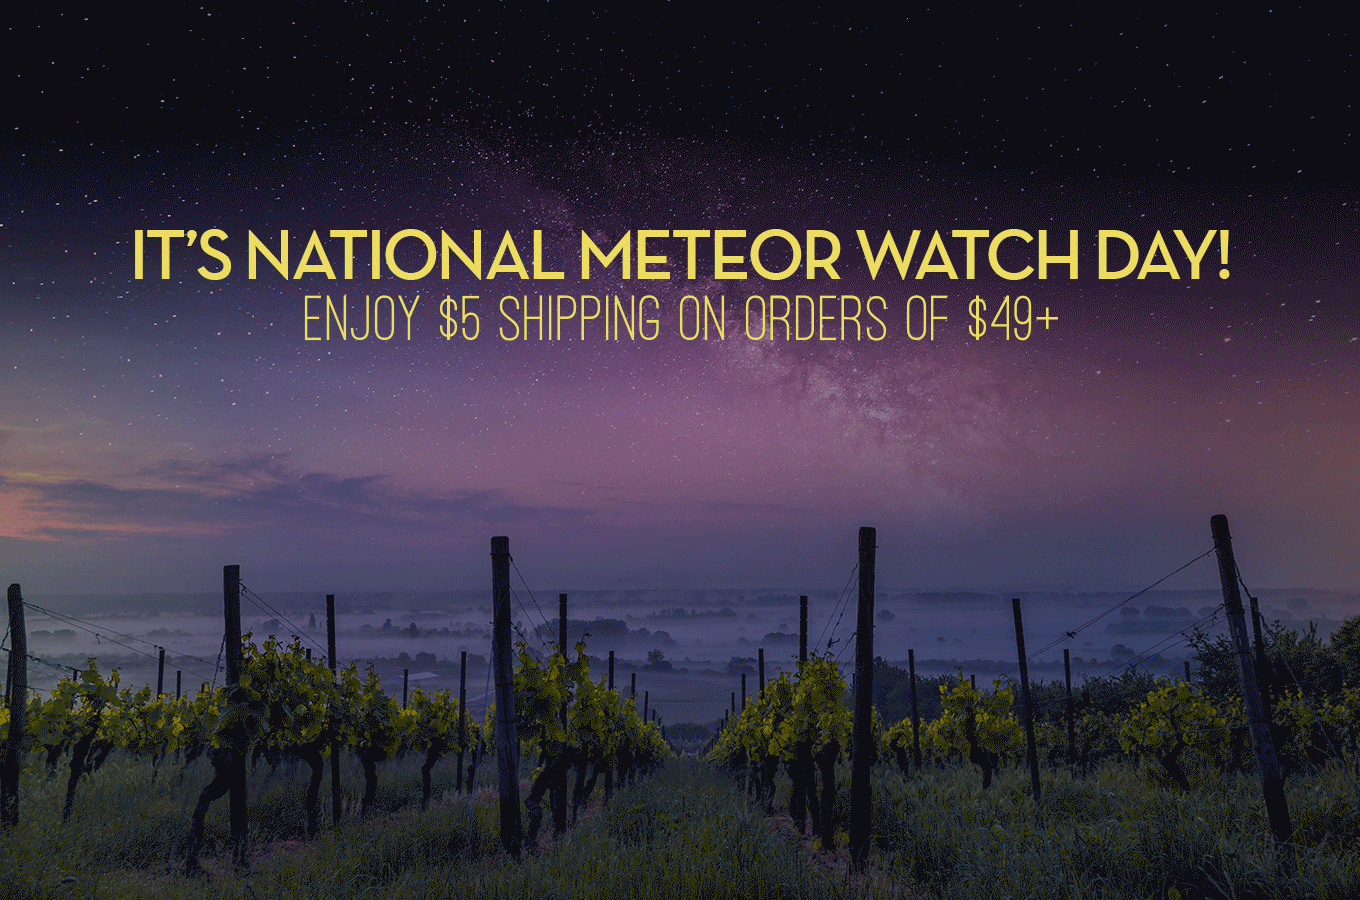 Its National Meteor Watch Day! Enjoy $5 Shipping on orders of $49+